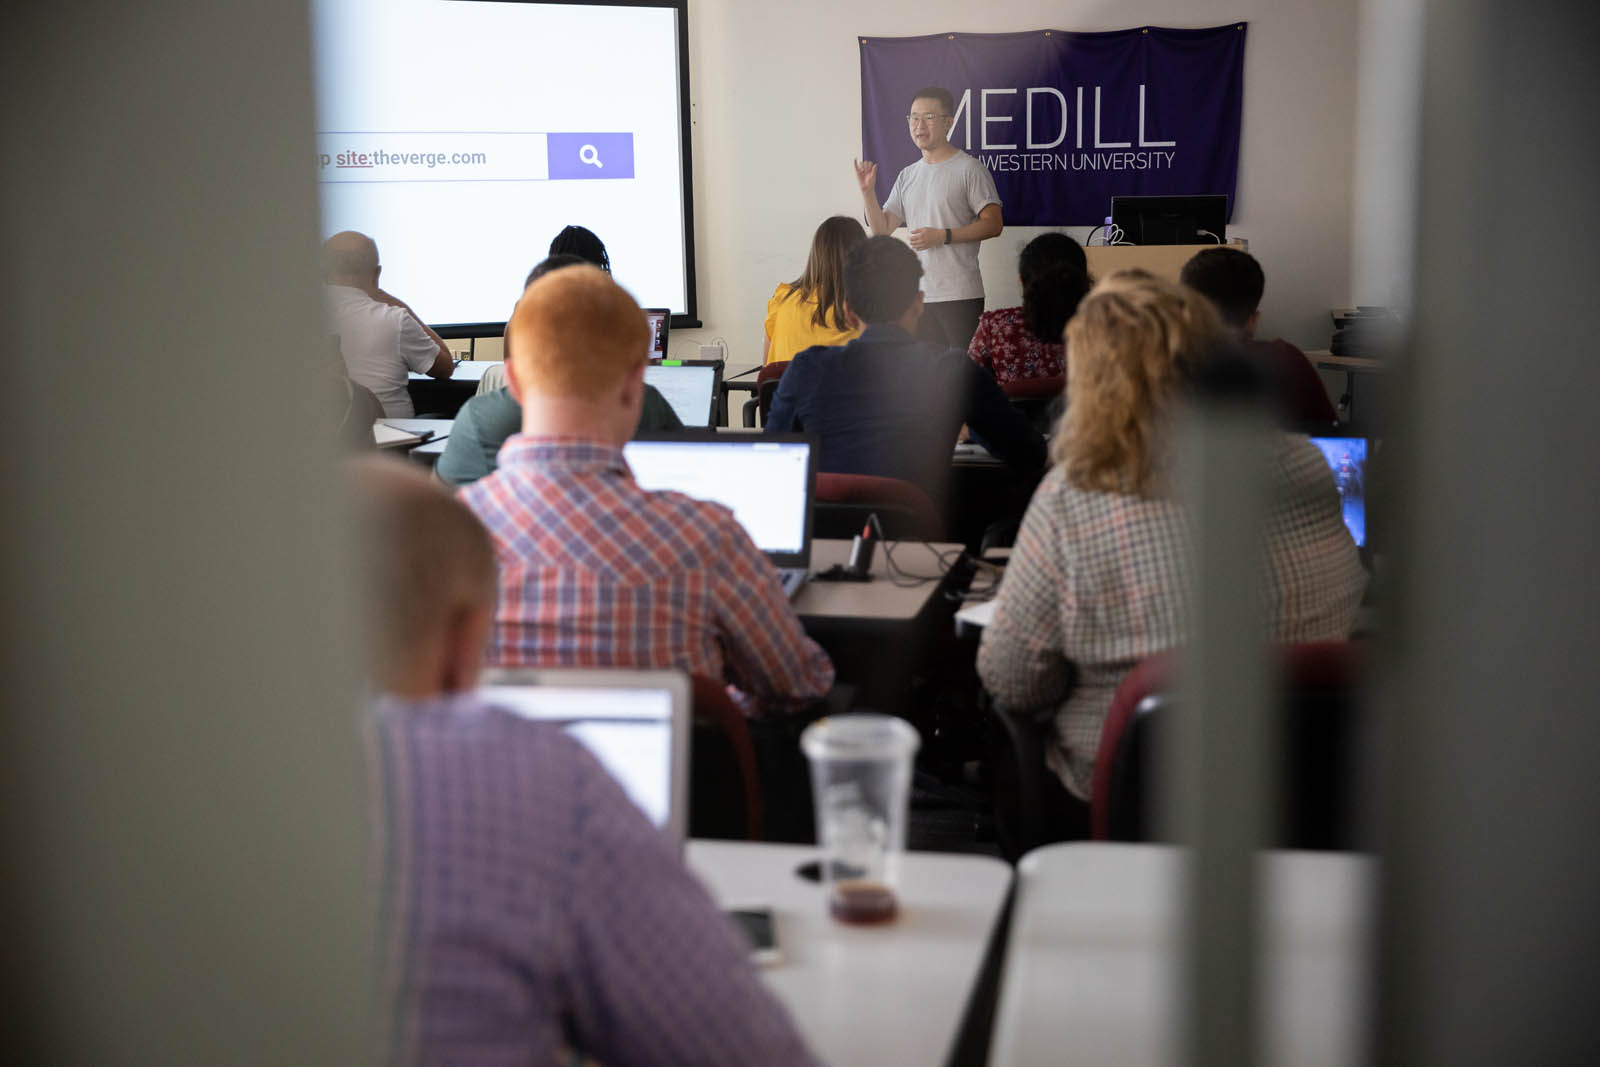 Introduction to Journalism students attend an SPJ Google training session led by Frank Bi at Northwestern University’s Washington Newsroom in Washington, DC, June 21, 2019. Photo by Lydia Thompson.